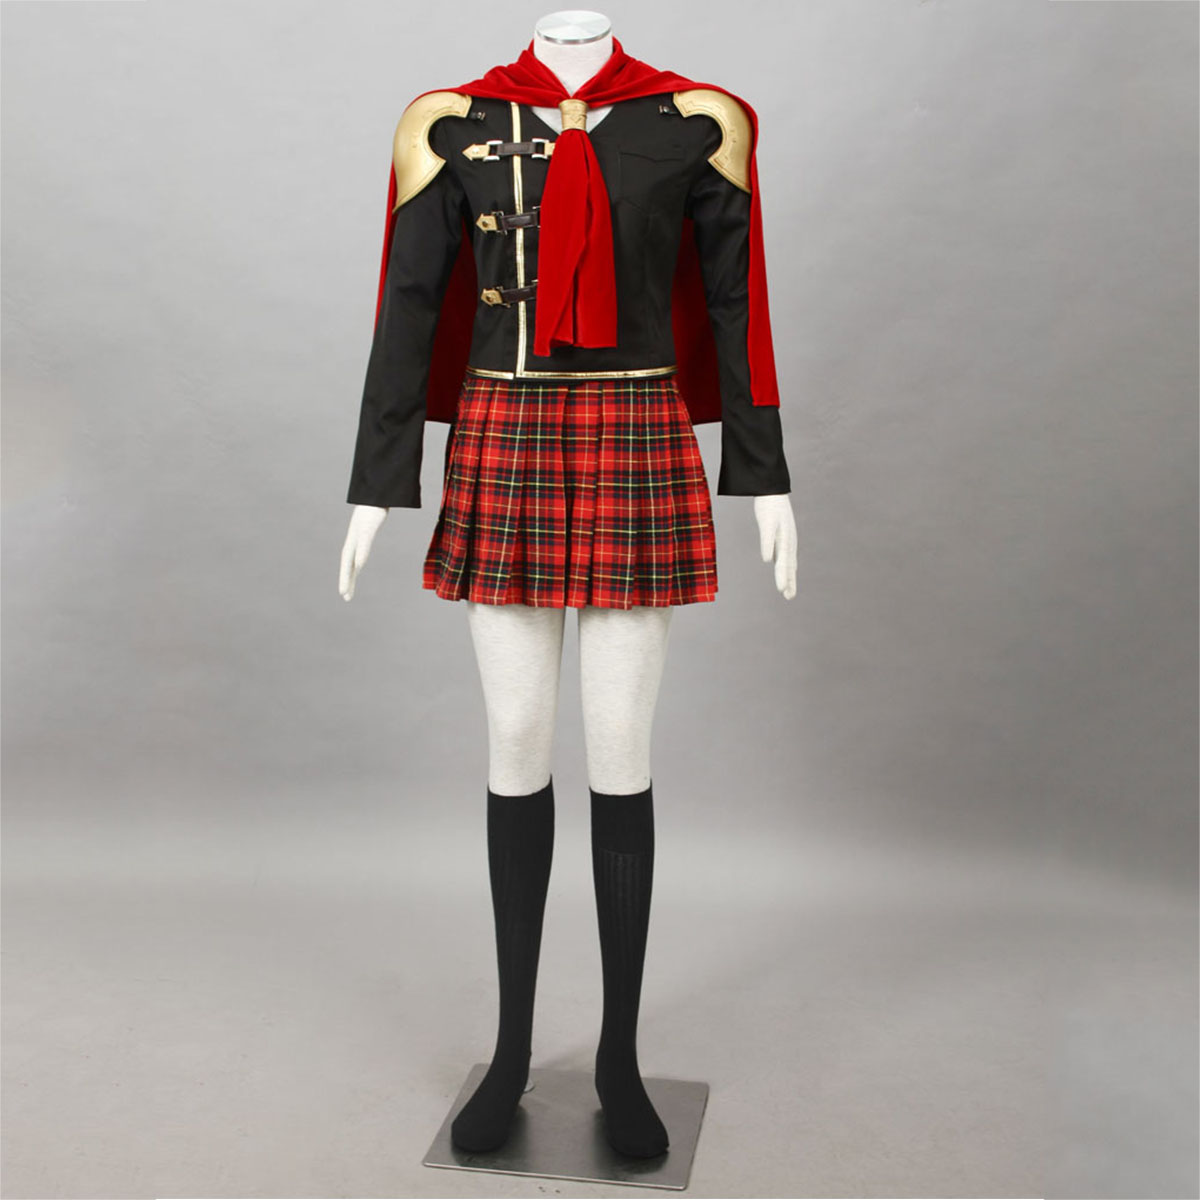 Final Fantasy Type-0 Queen 1 Cosplay Costumes AU